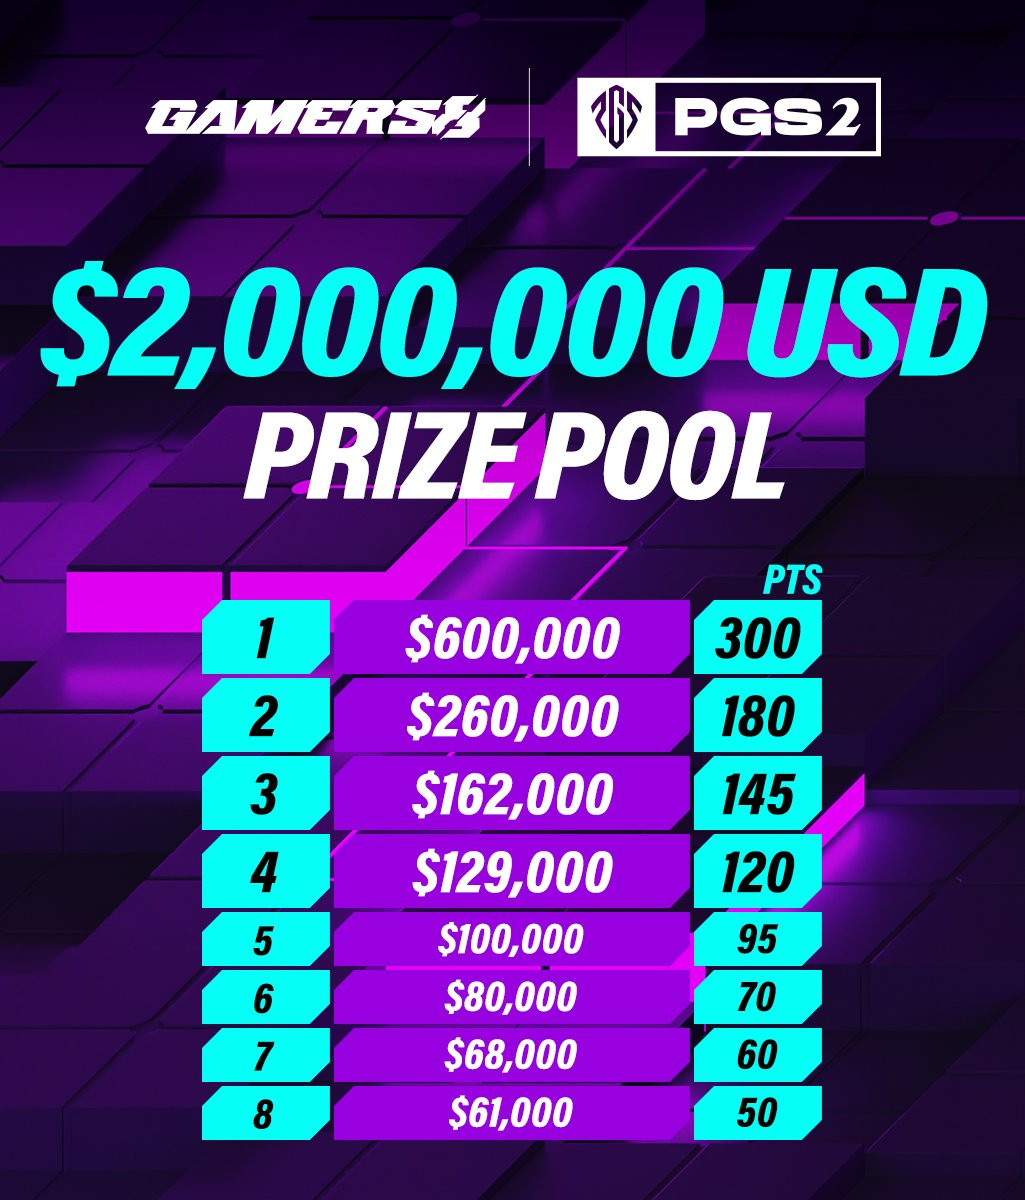 PGS 2 Prize pool distribution revealed